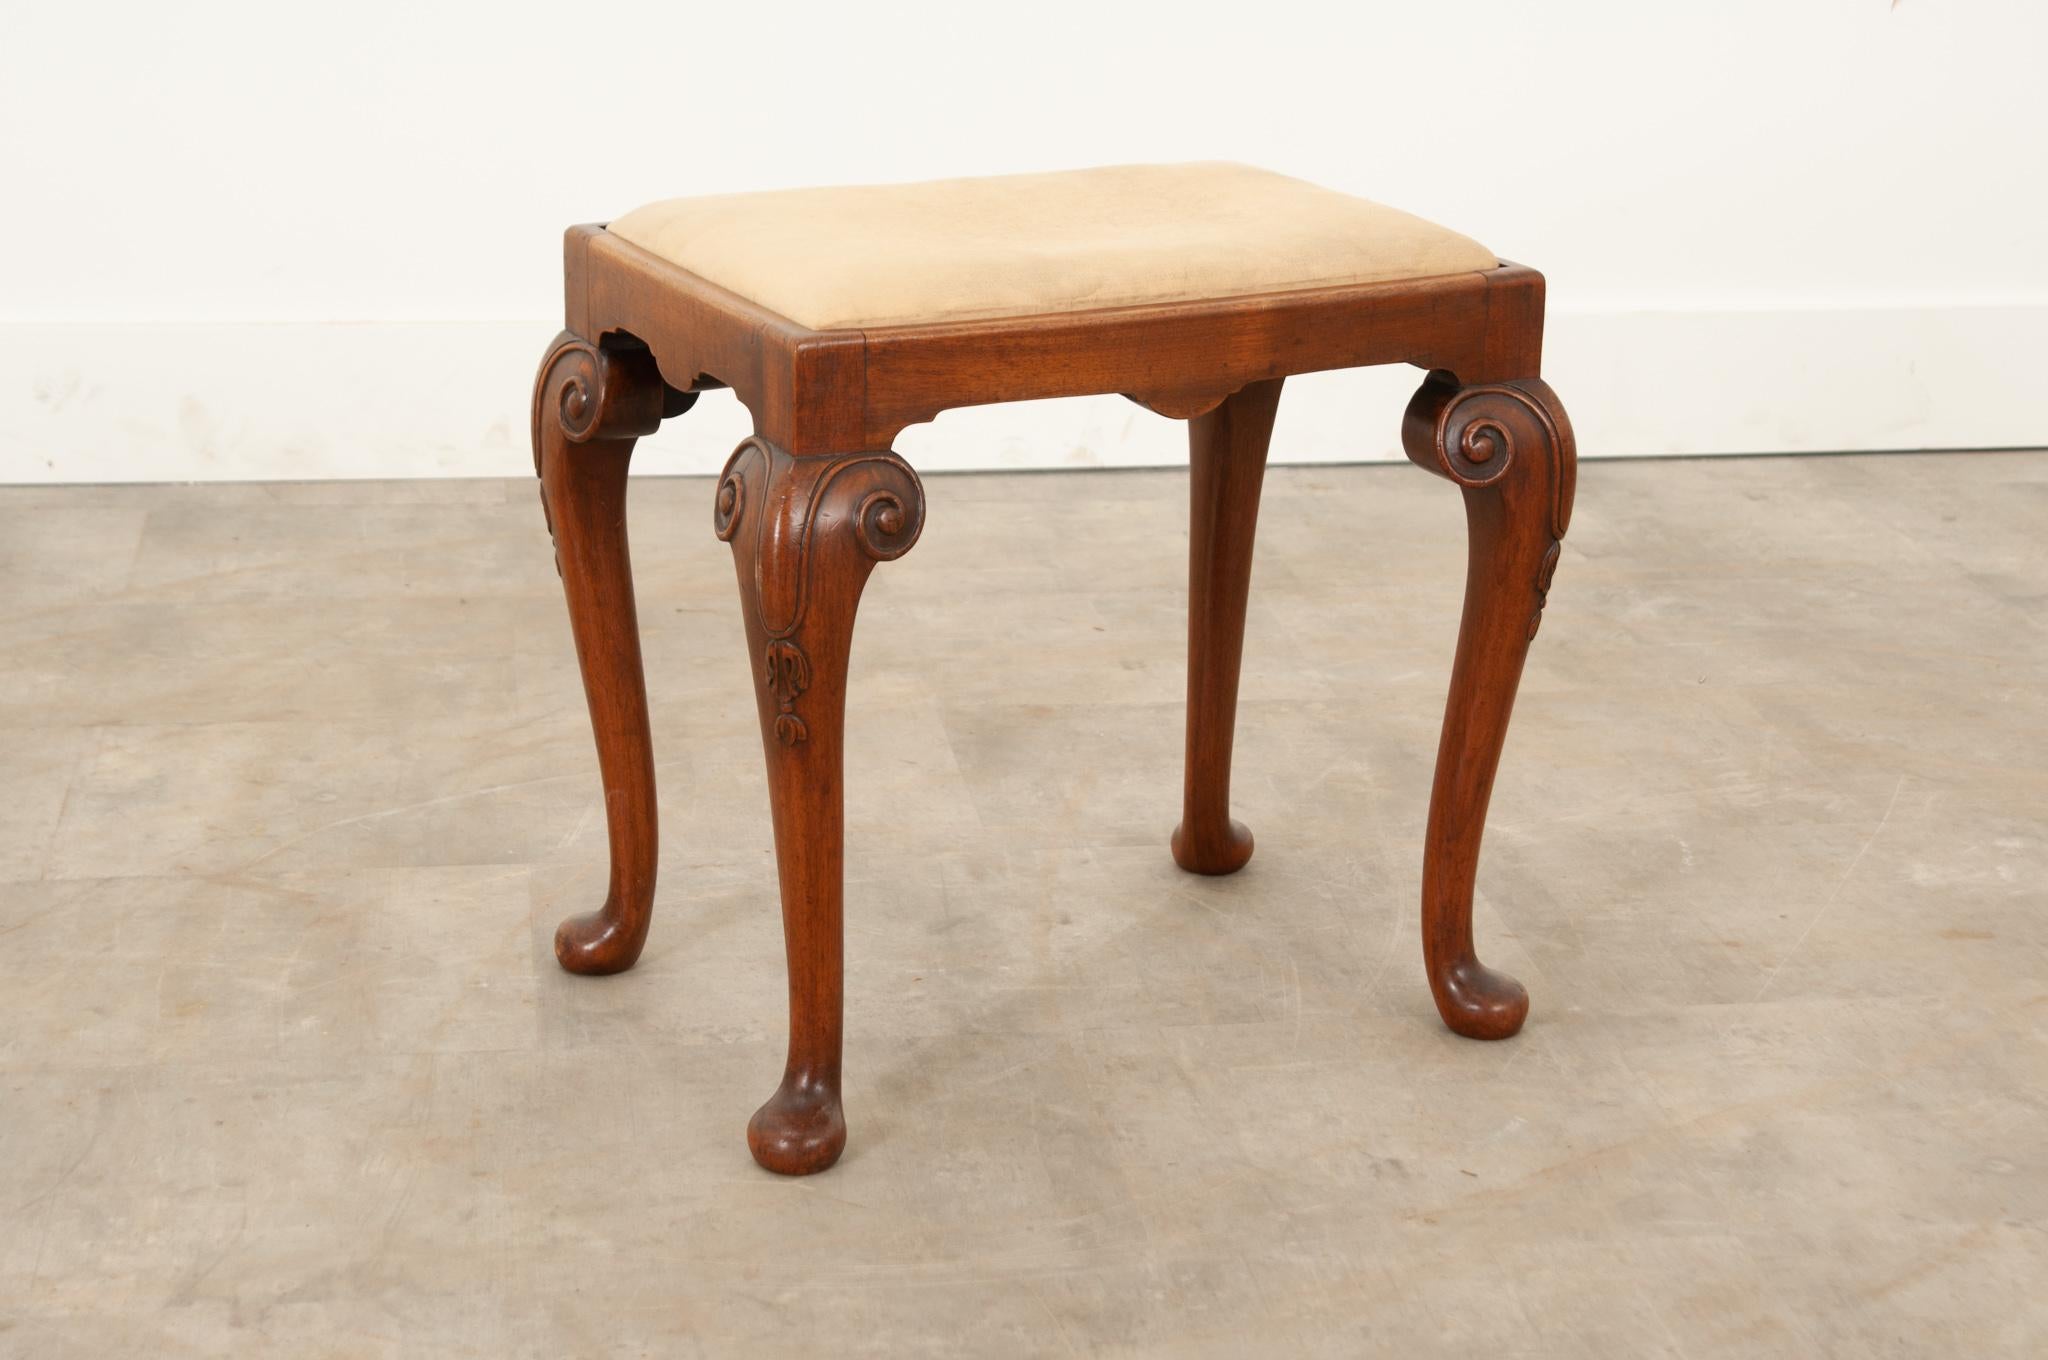 A darling English Regency style stool circa 1880. The solid walnut frame showcases swirling and folate carved designs on the legs and finishes with spoon feet. Upholstered in worn champagne toned fabric and backed with burlap, the removable cushion